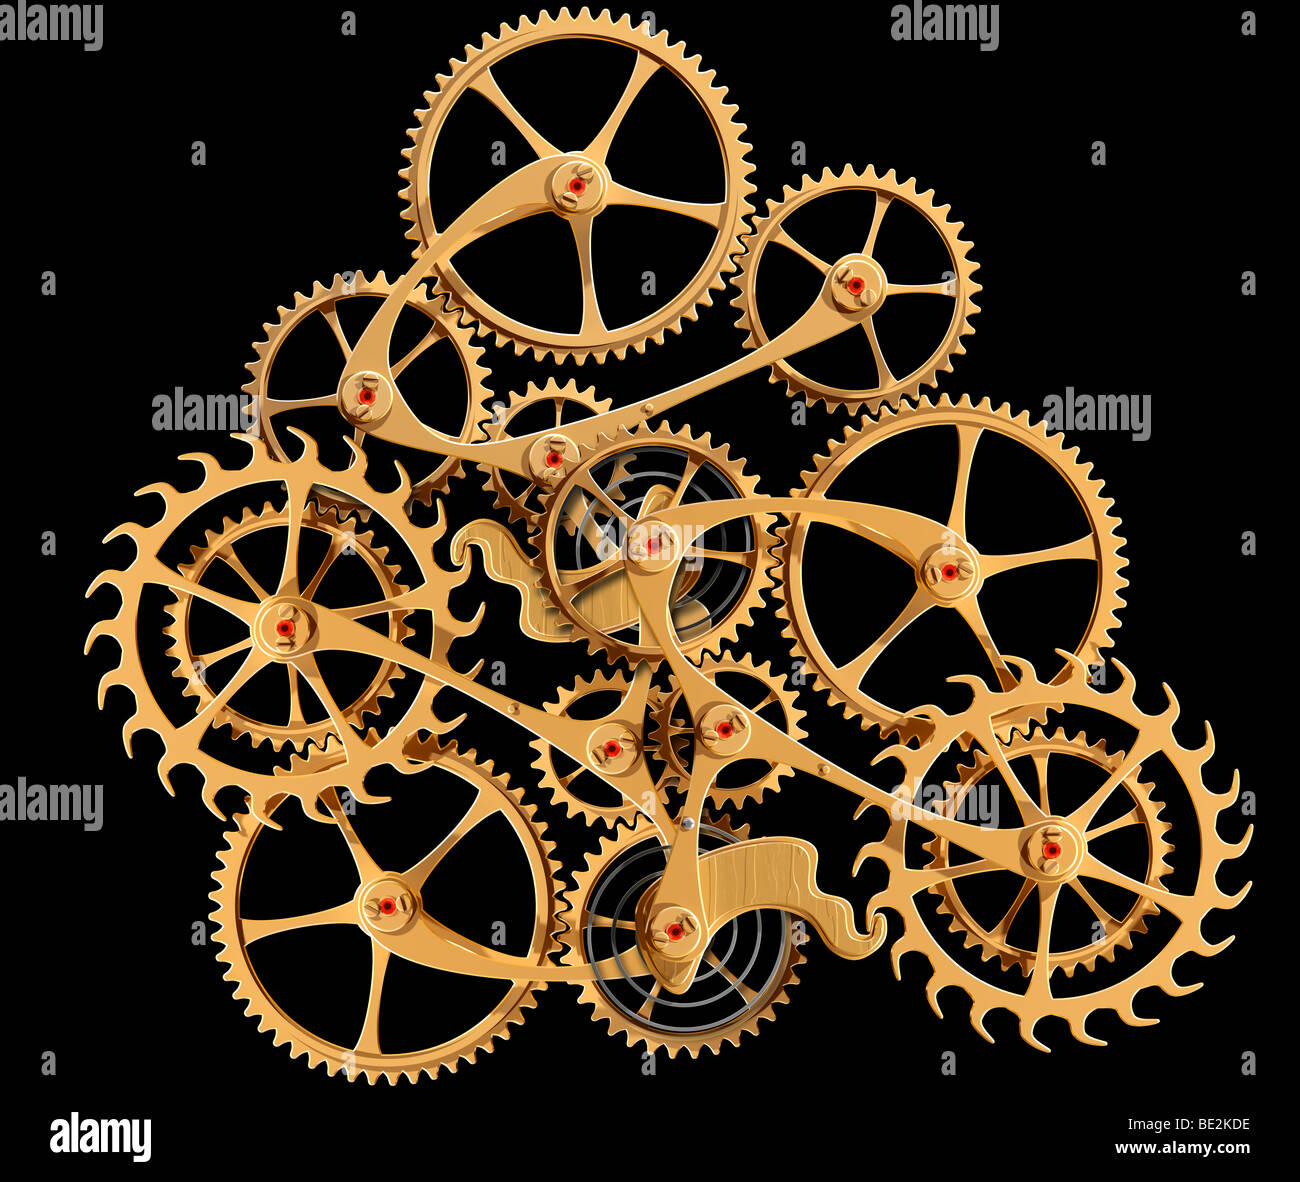 Illustration of precision engineered cogs and gears isolated on black Stock Photo